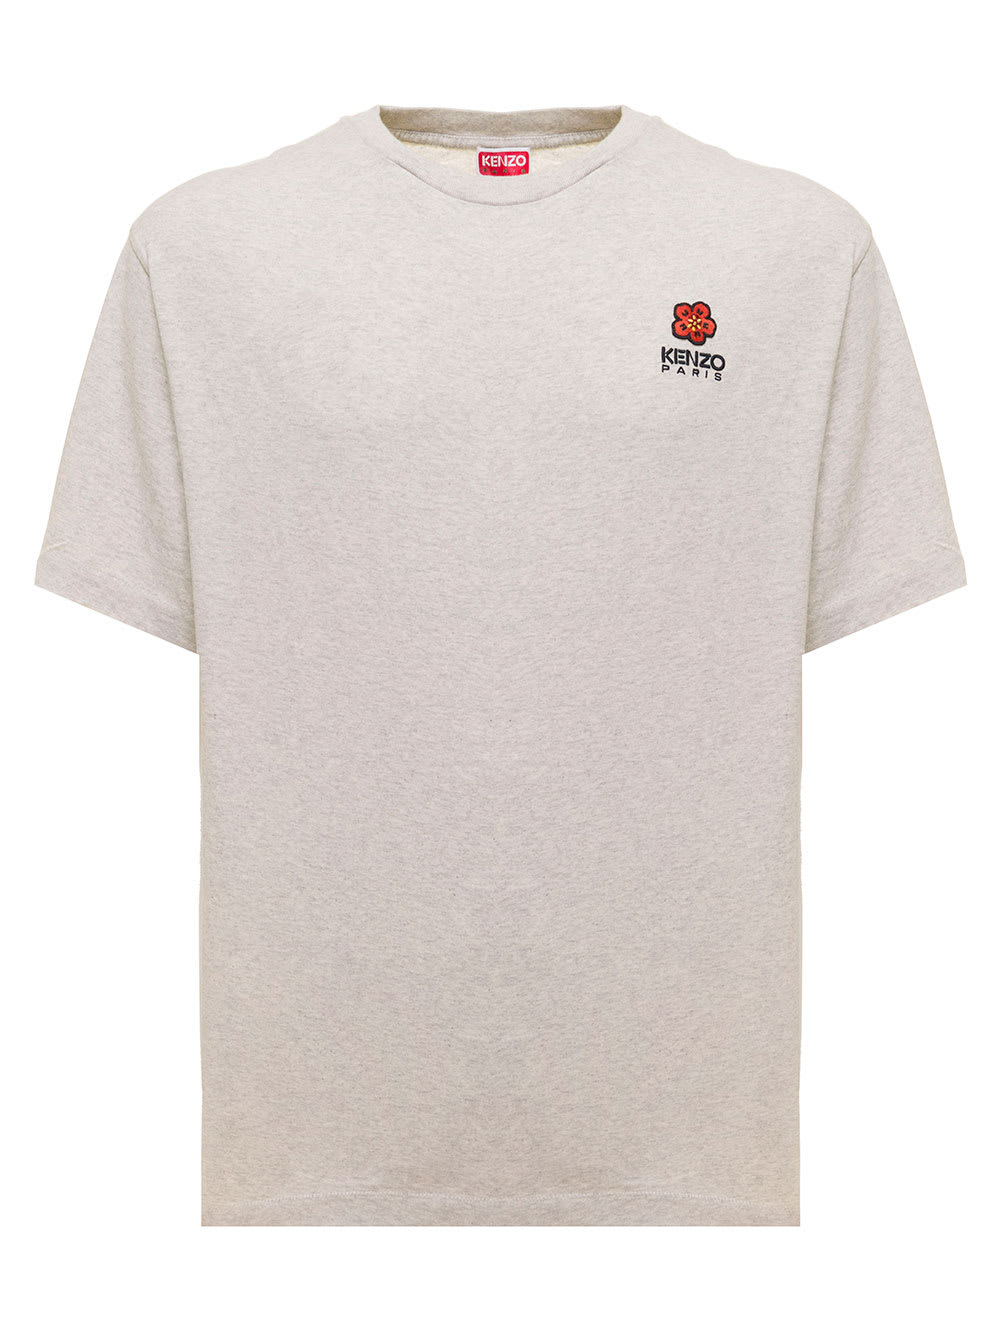 KENZO CREST MELANGE GRAY COTTON T-SHIRT WITH KENZO MENS LOGO PATCH